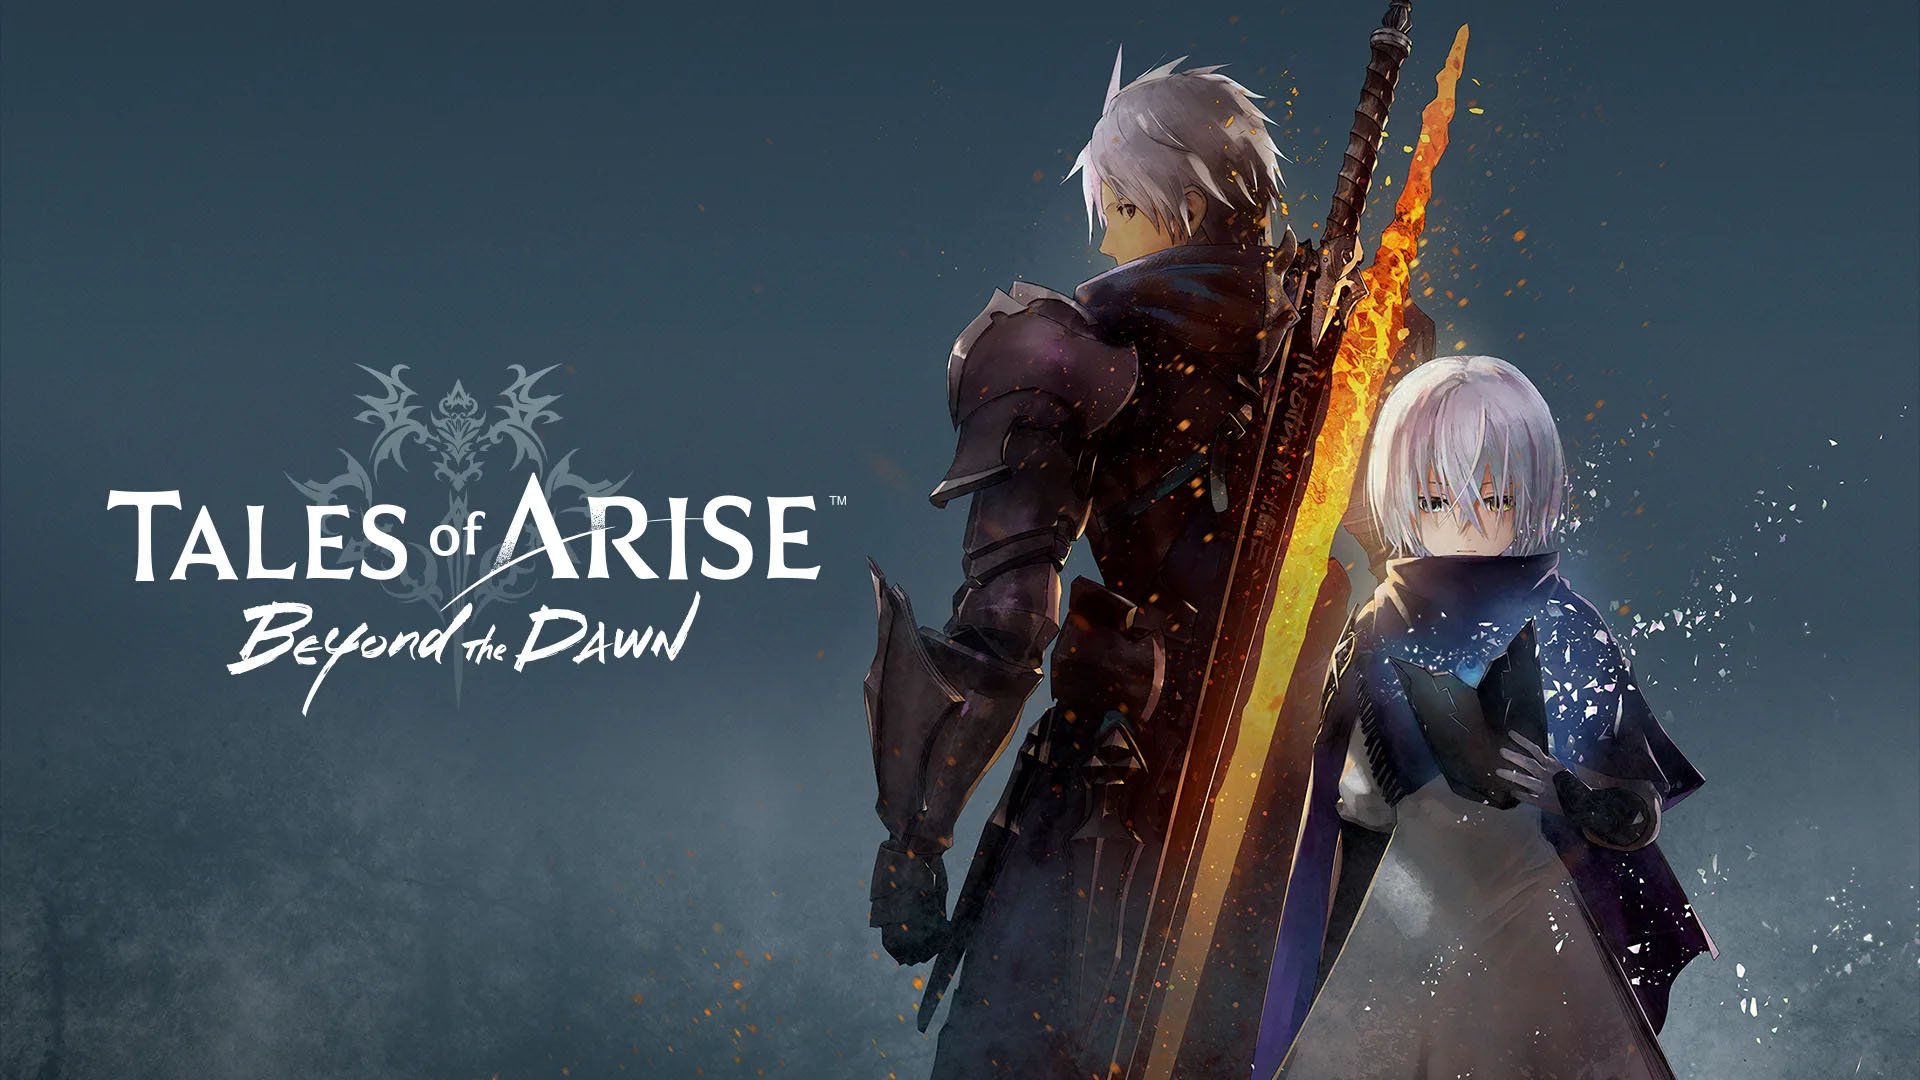 Tales of Arise expansion 'Beyond the Dawn' announced - Gematsu